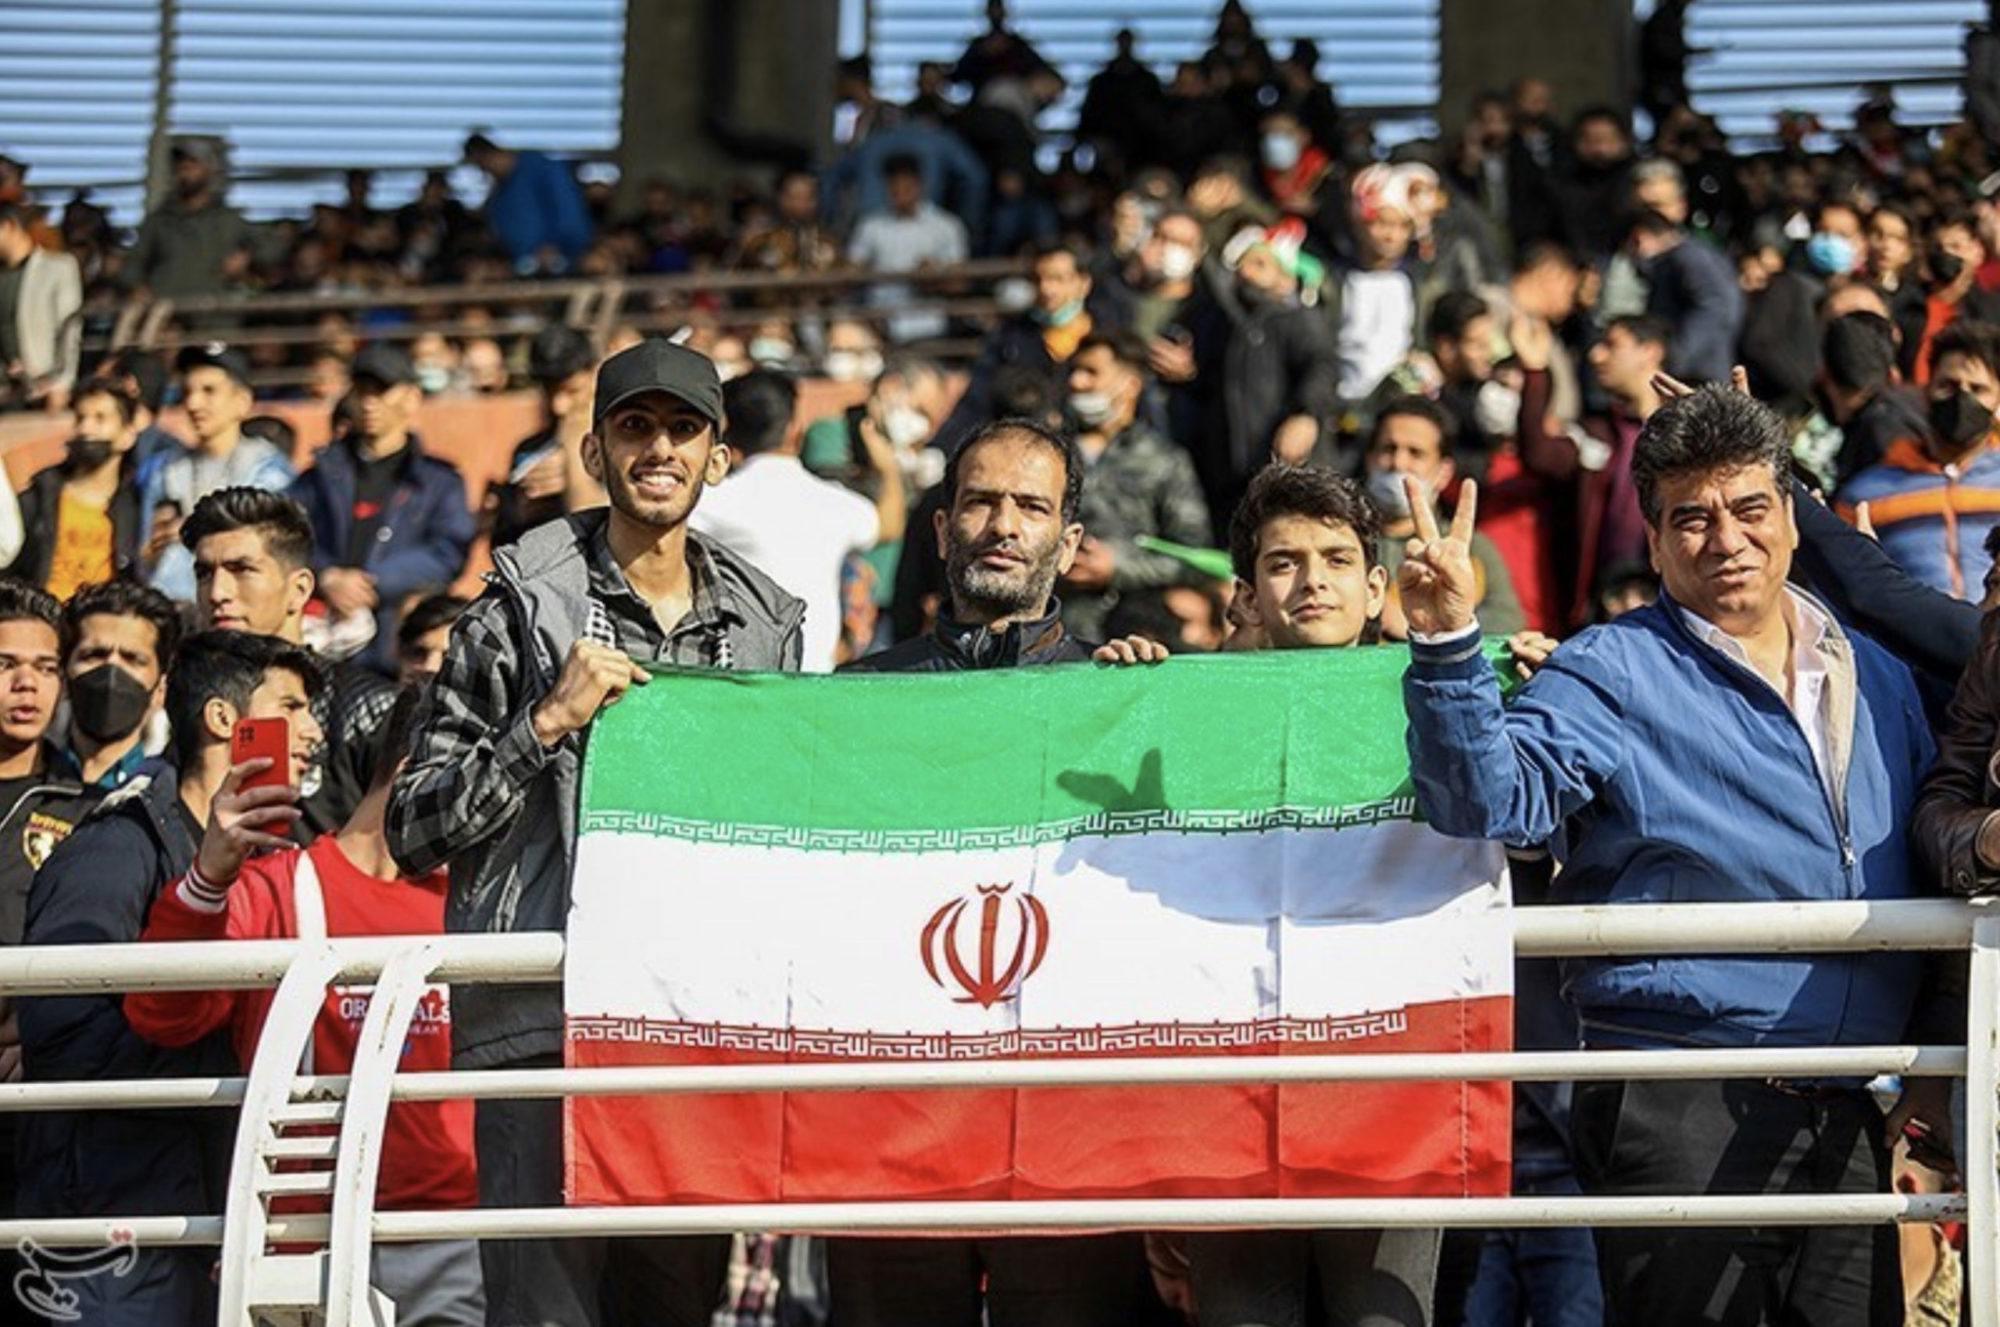 ifmat - Iran shows ceaseless violation of Womens rights by pepper spraying them outside soccer stadium